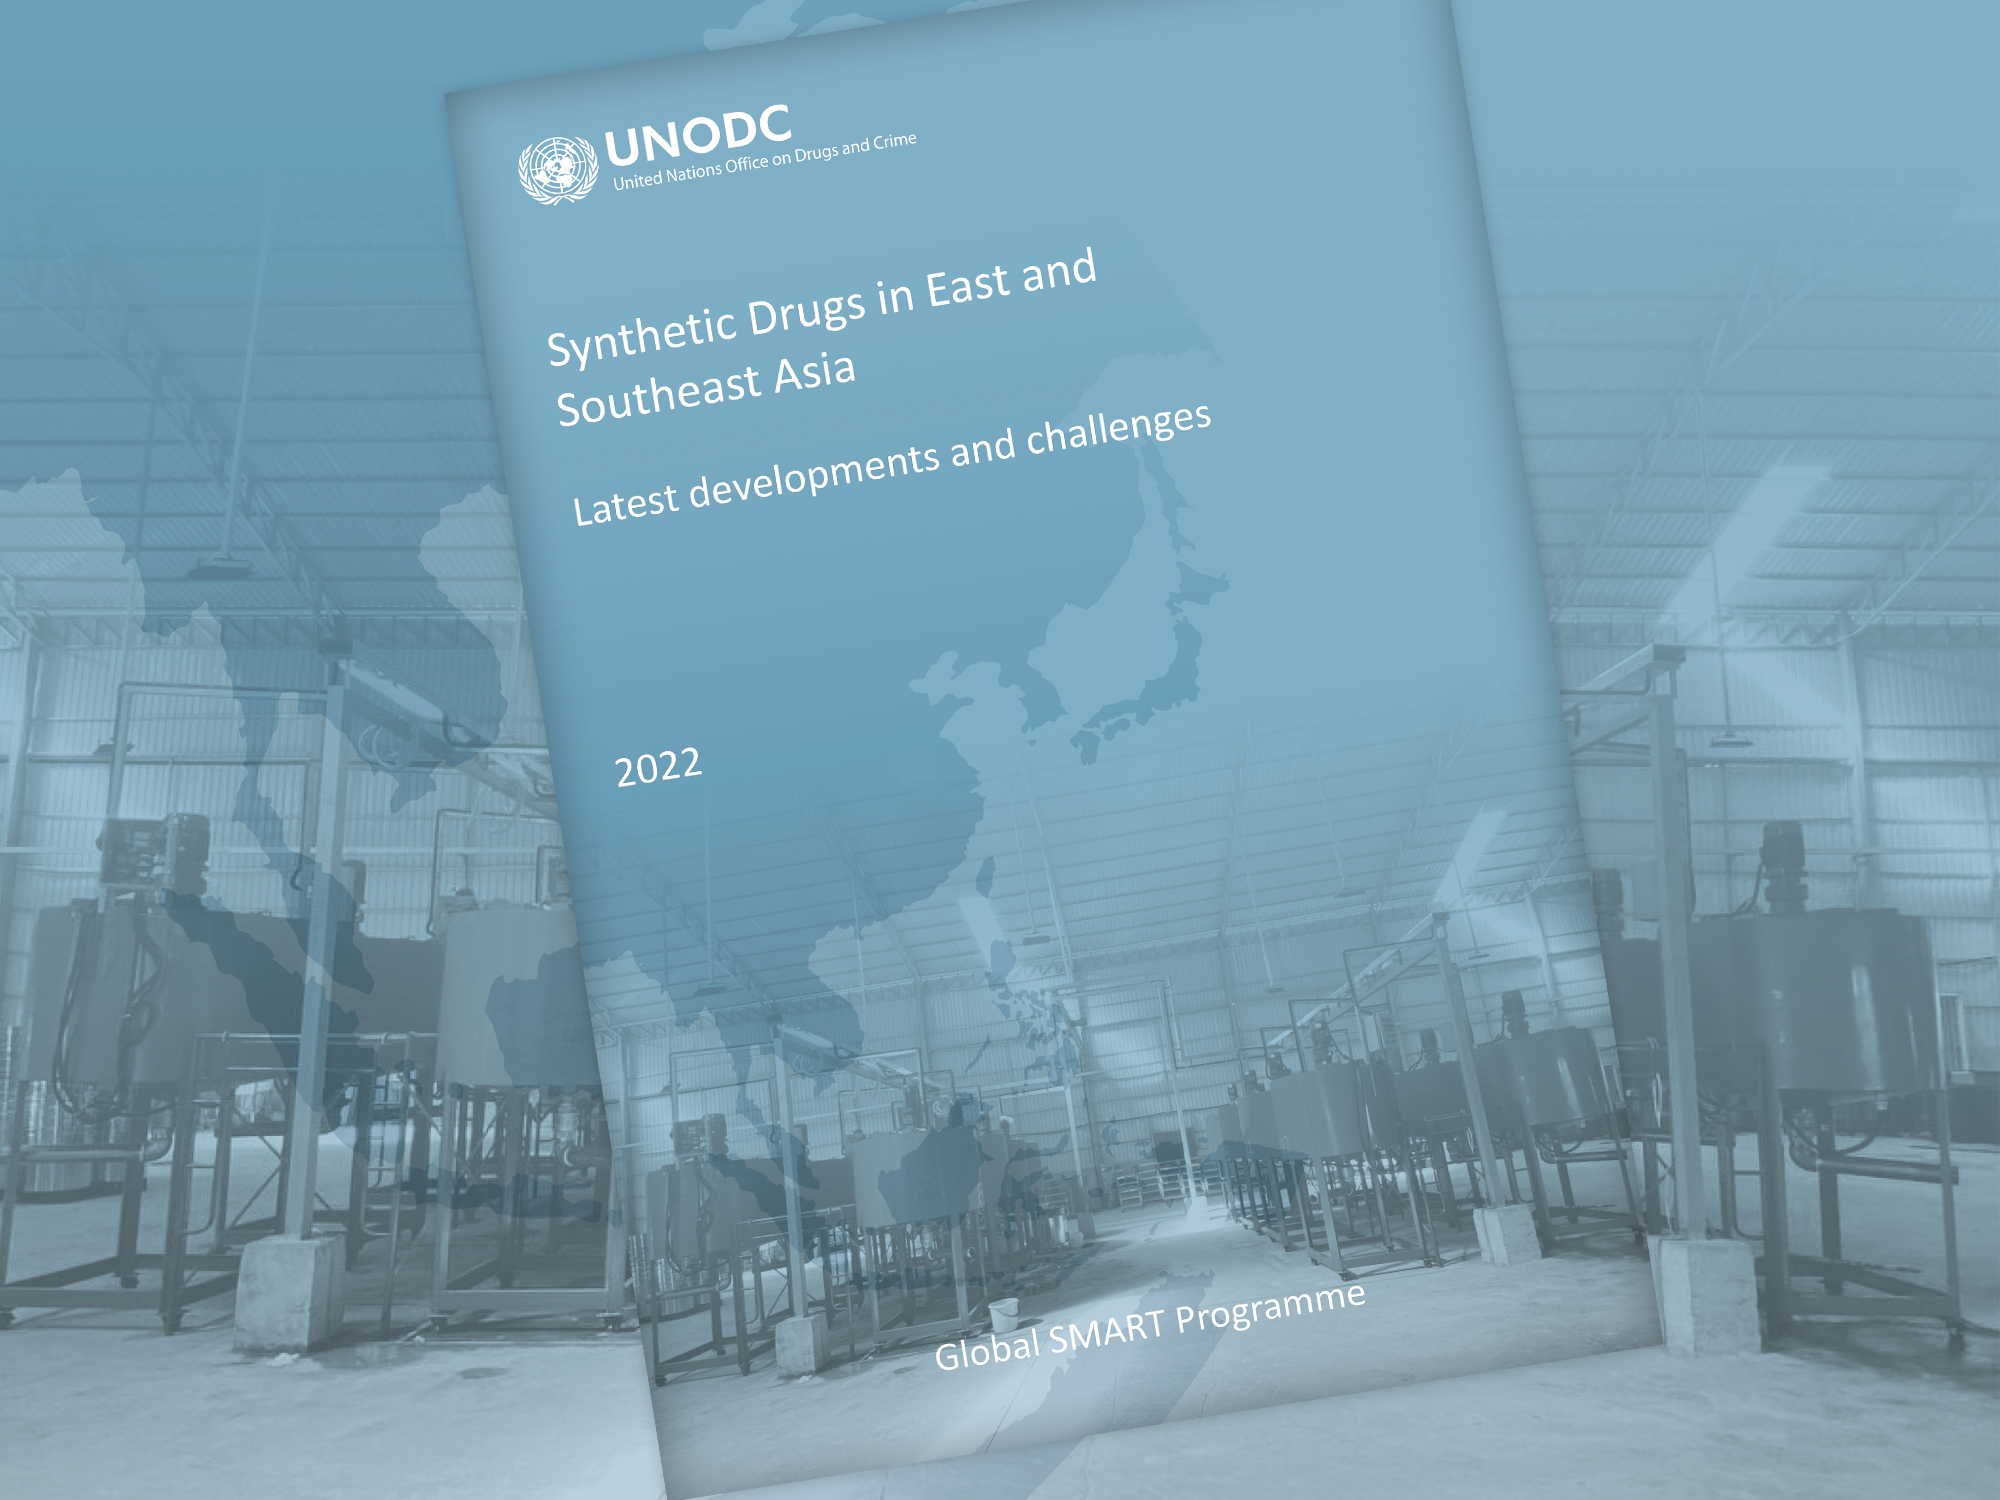 UNODC Regional Office for Southeast Asia and the Pacific